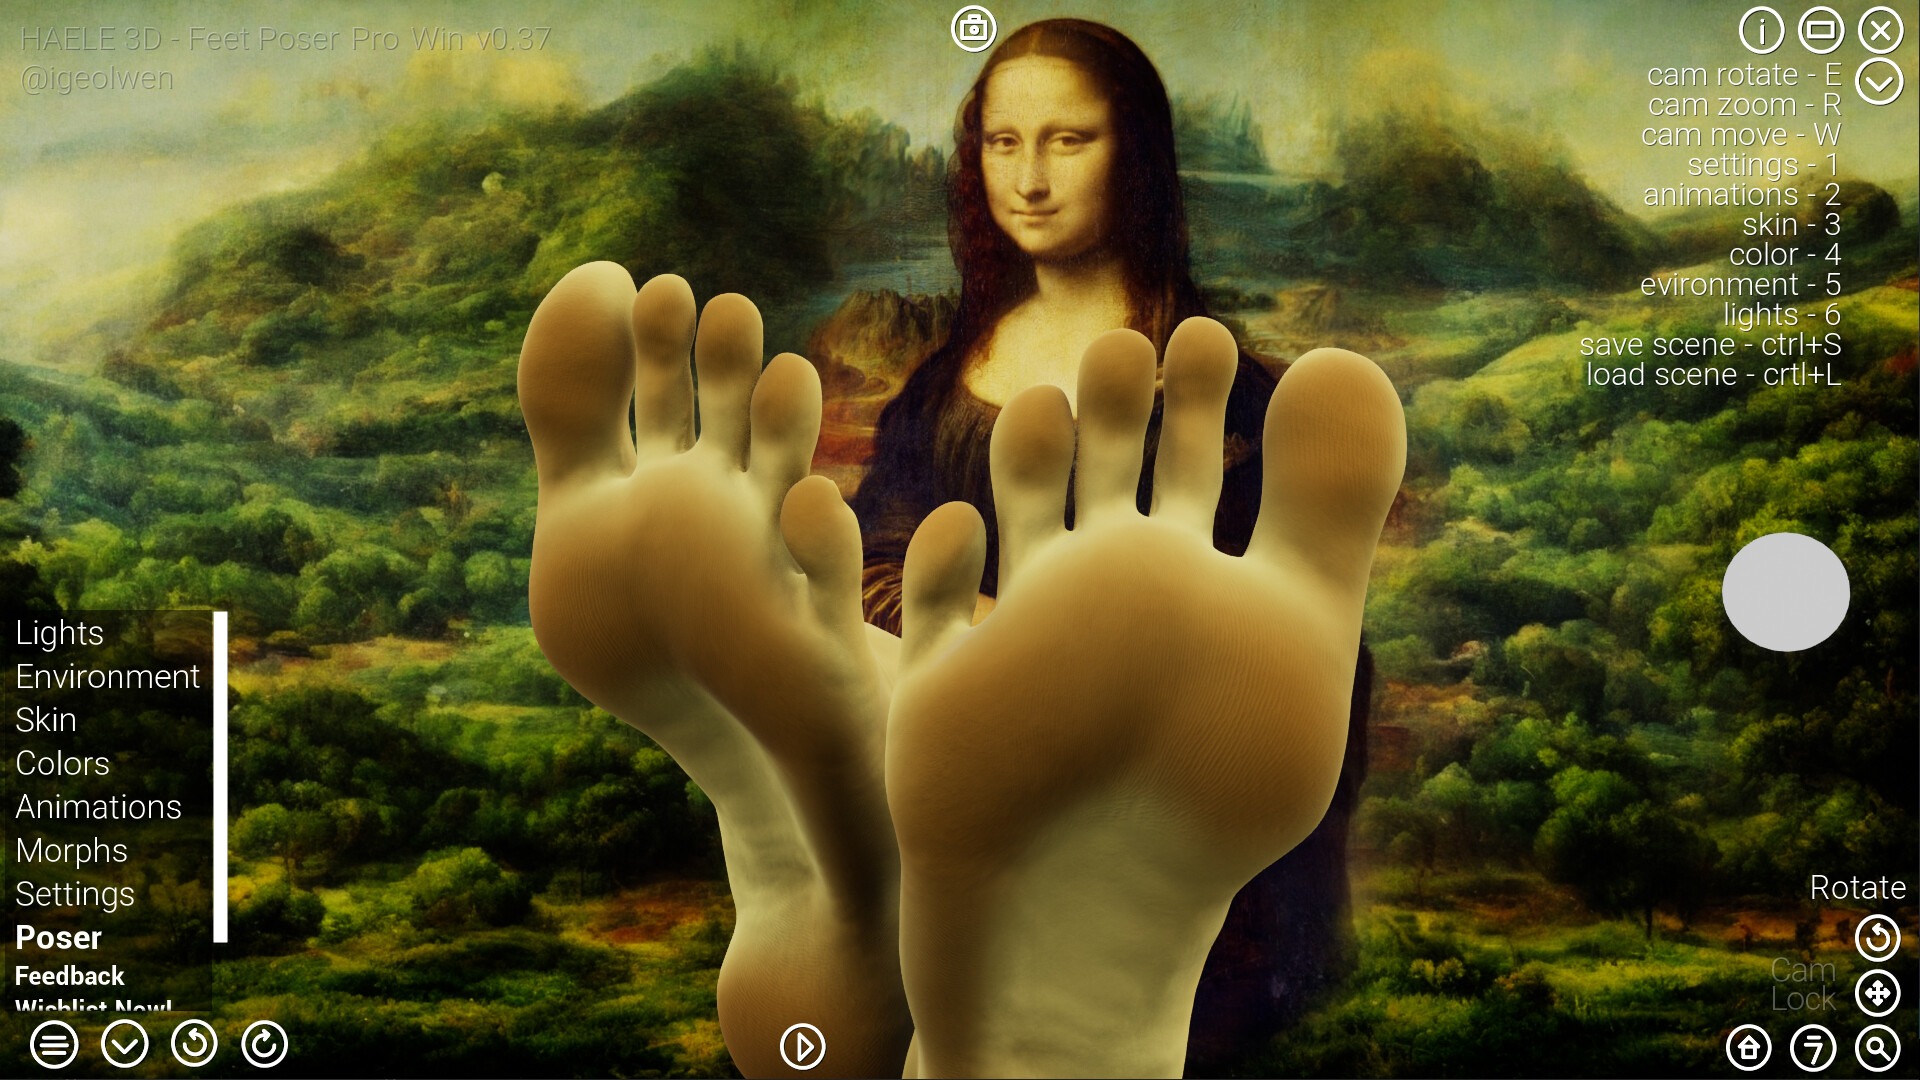 You can try this “foot poser simulator” for free, which is eerily detailed